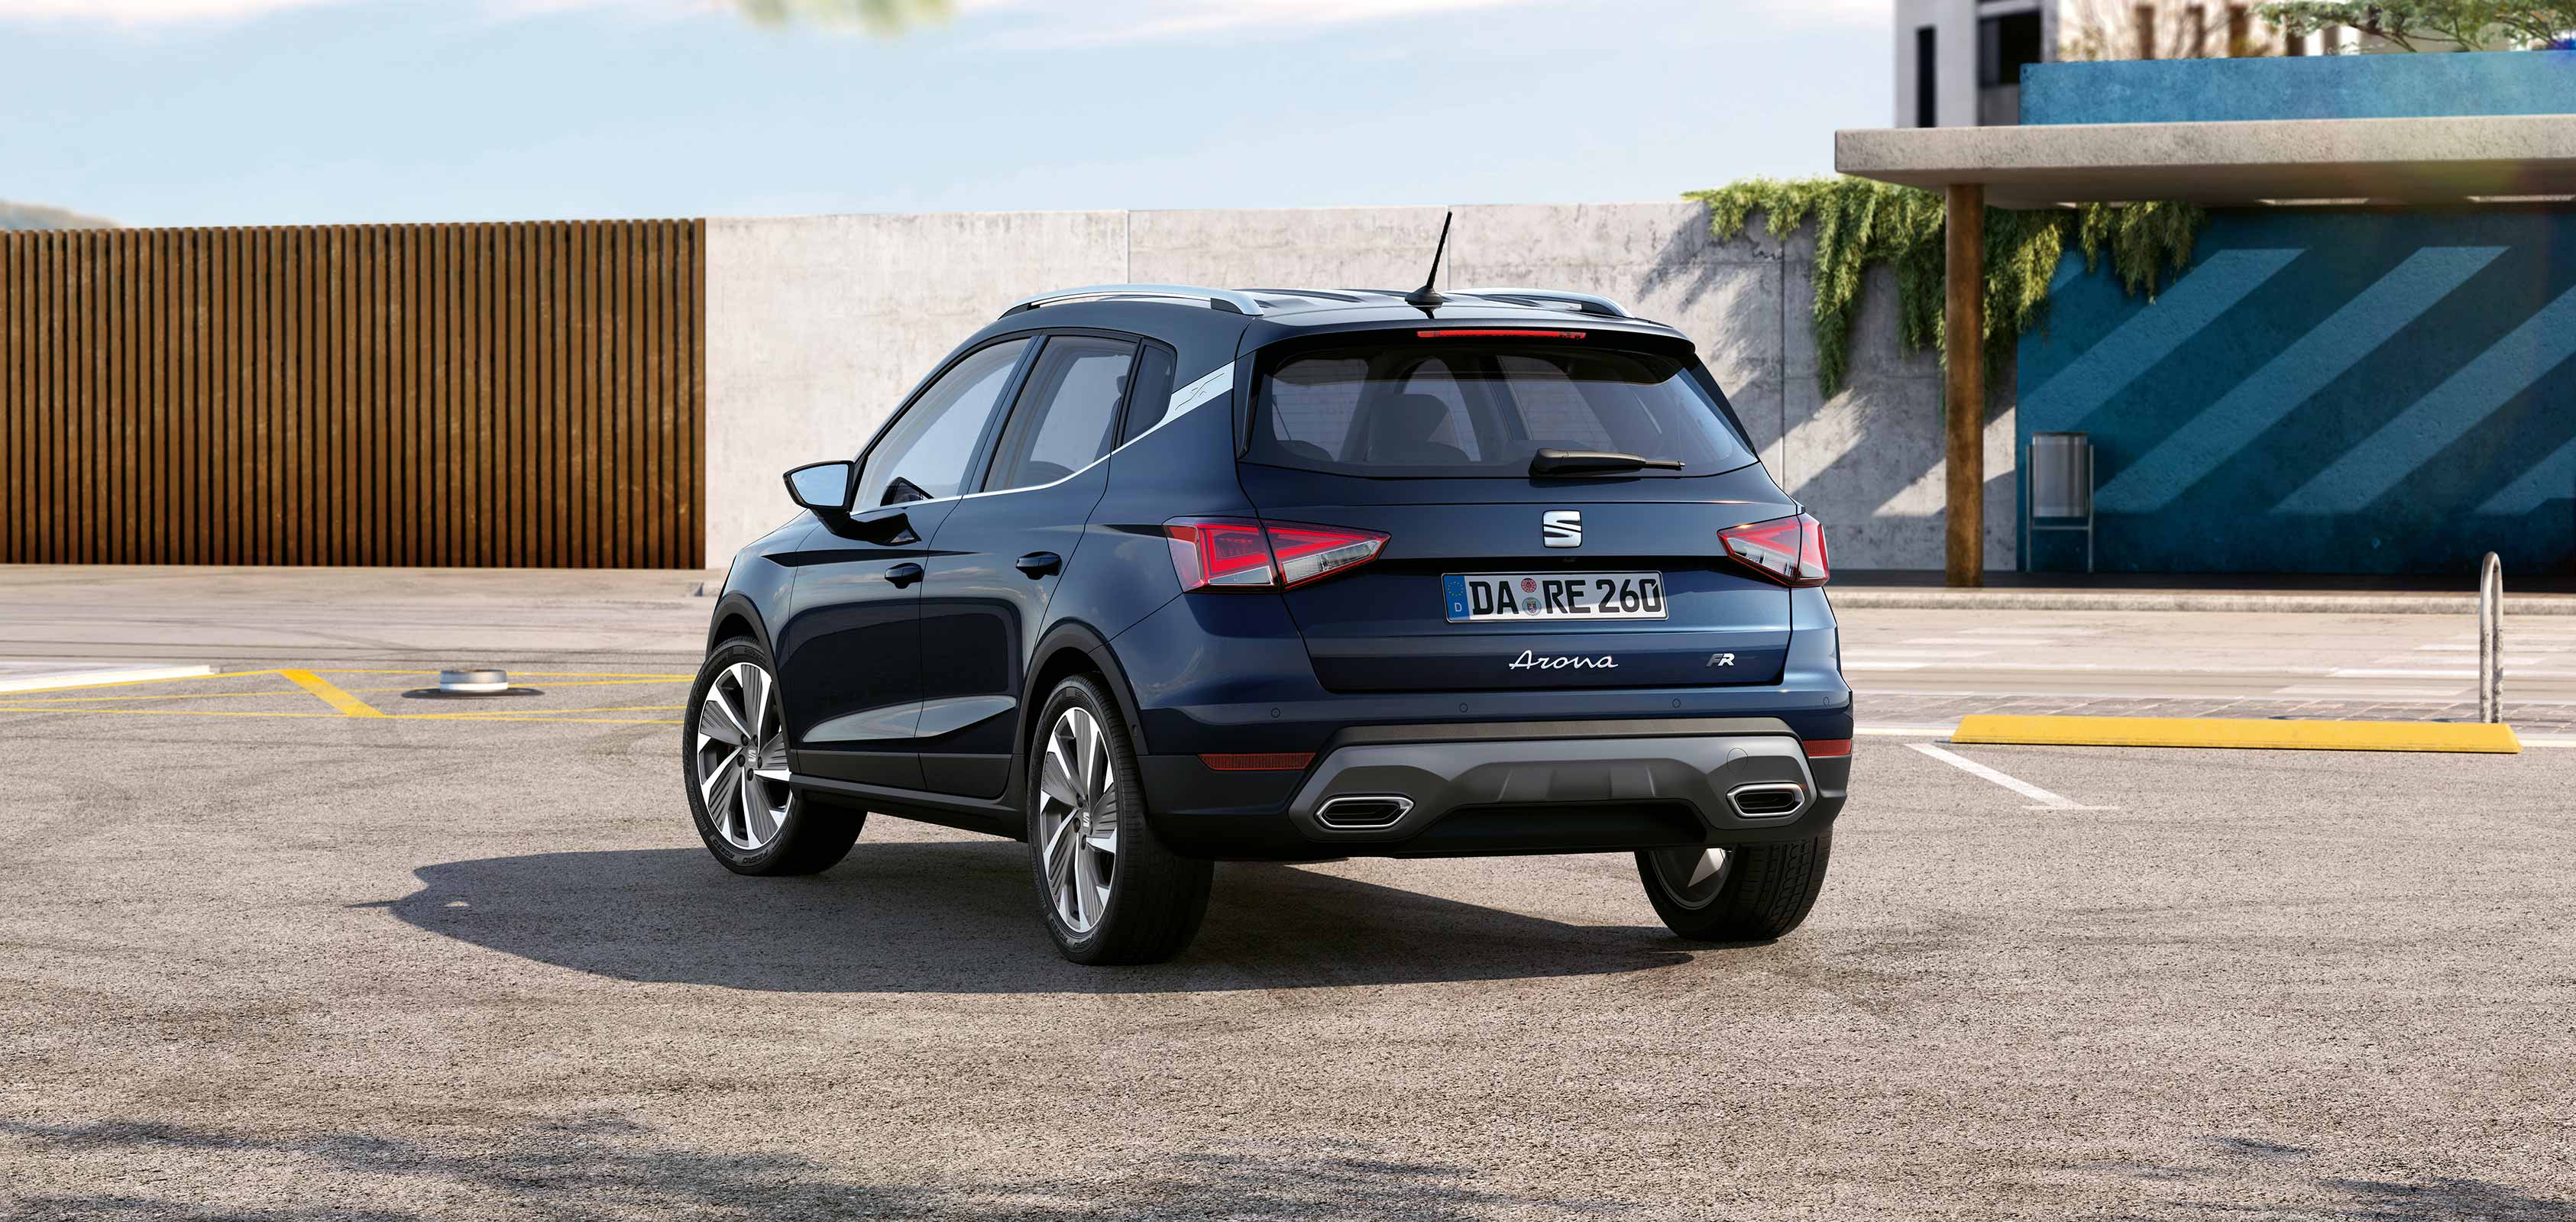 Rear view of SEAT Arona dark camouflage colour with a candy white roof   